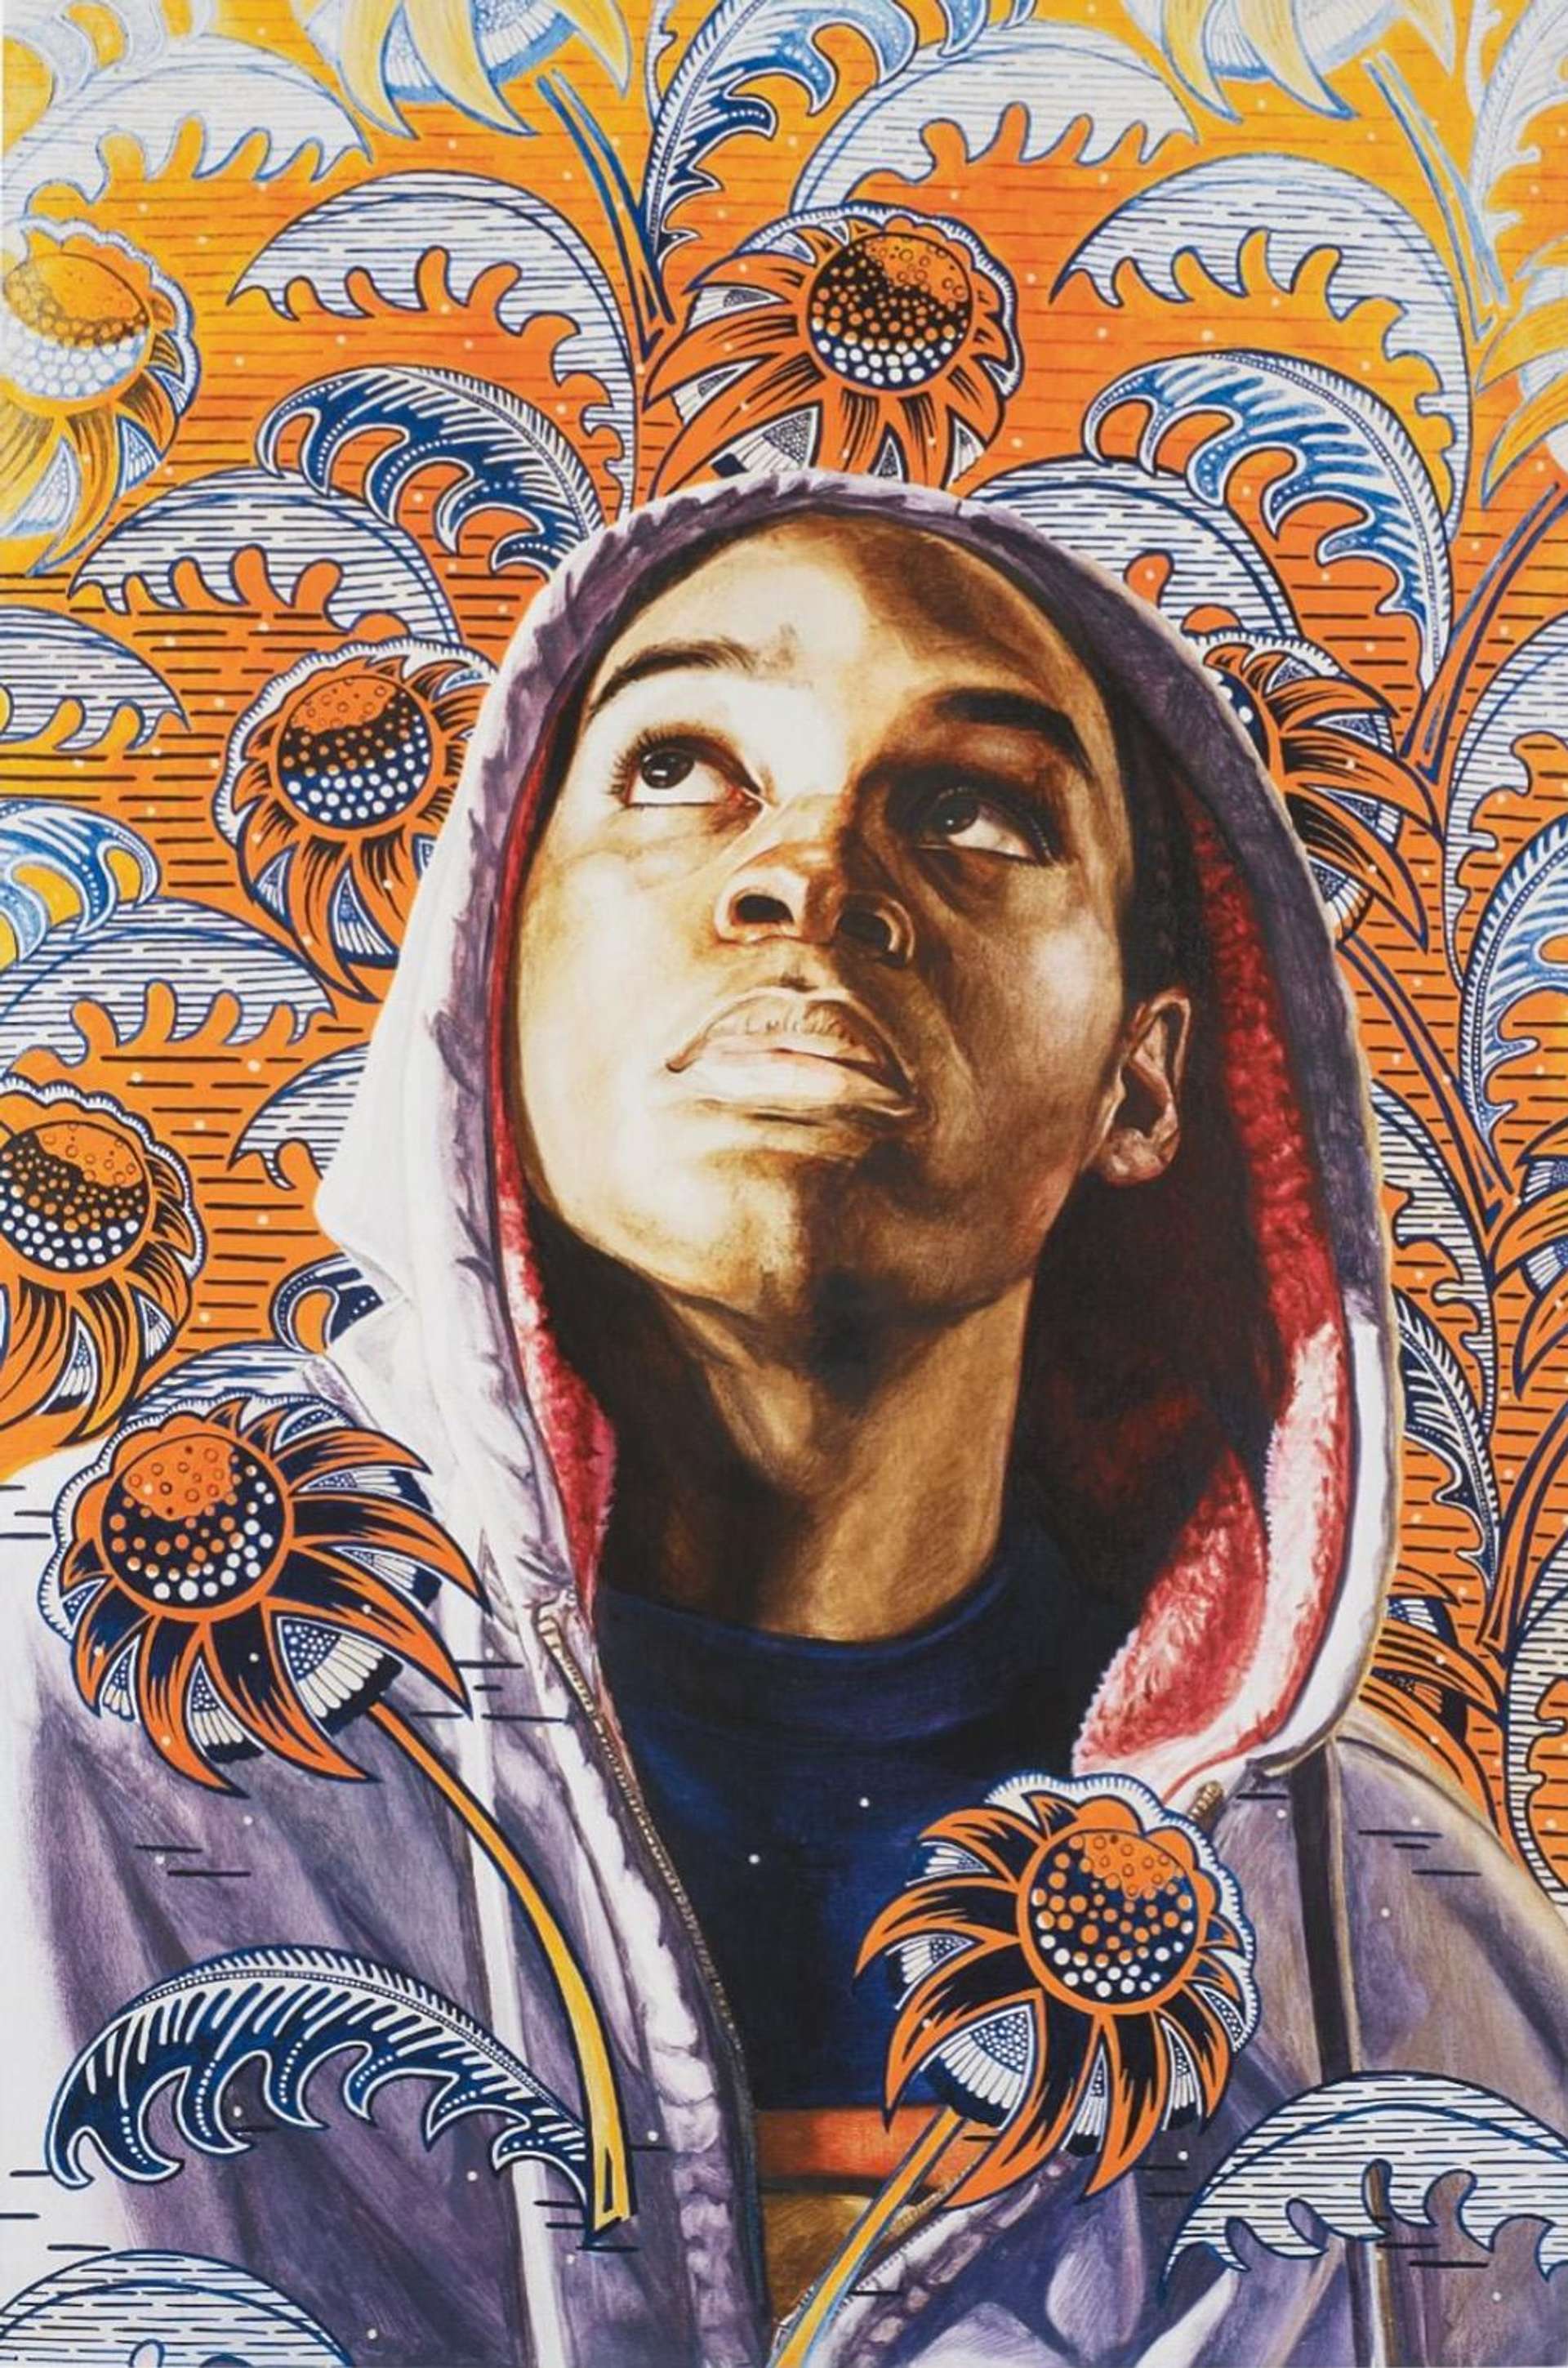 Kehinde Wiley’s Sophie Arnould. A pigment print of a woman dressed in a purple hooded sweatshirt in front of an orange background with blue and white floral accents.